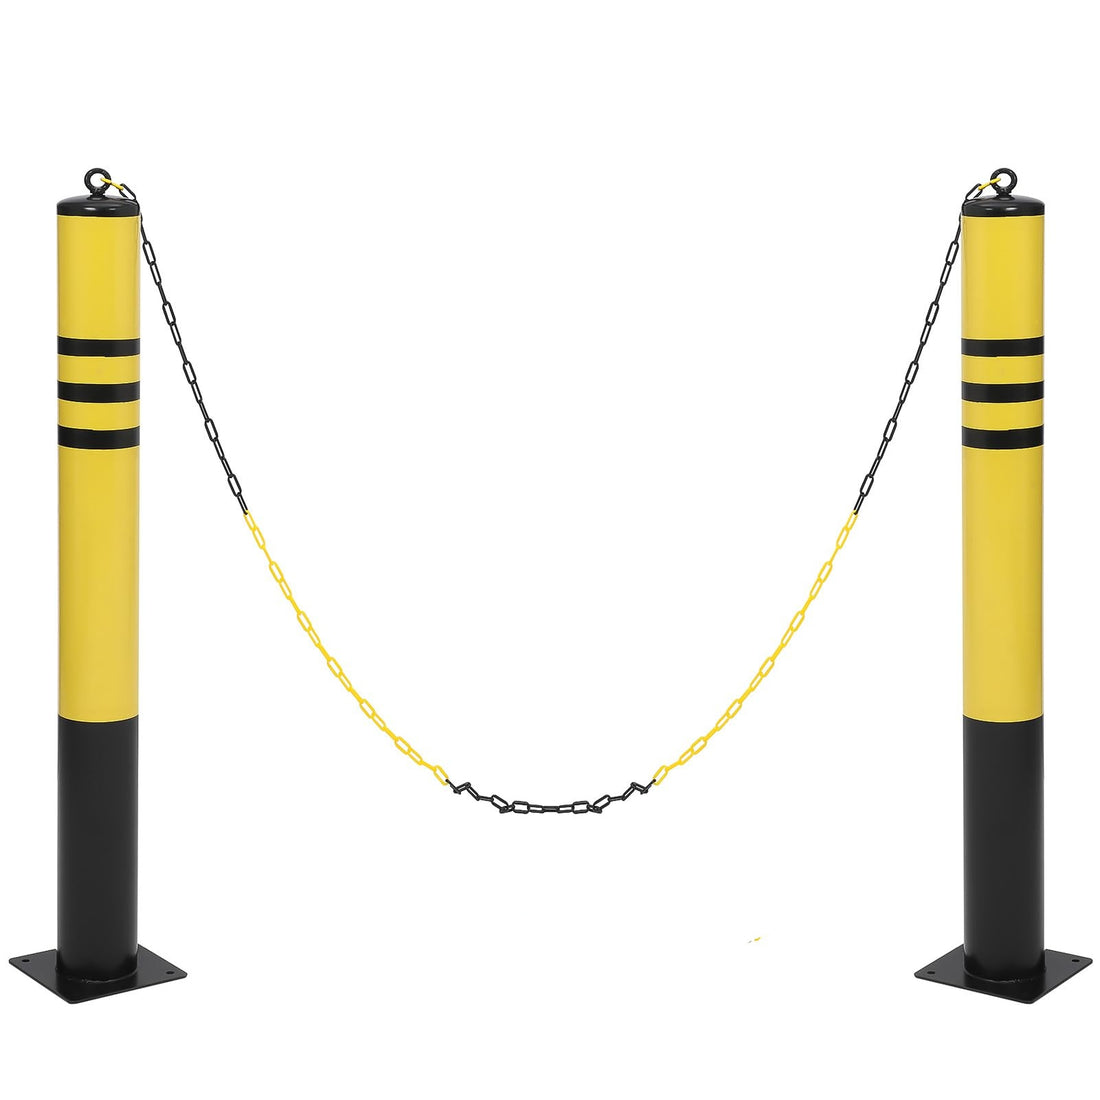 42 Inch Safety Bollard,Height Bollard Post,4.5 Inch OD Safety Barrier Bollard,Yellow Powder Coat Pipe Steel Safety Barrier with 8 Free Anchor Bolts,Perfect for Traffic-Sensitive Area,2 Packs